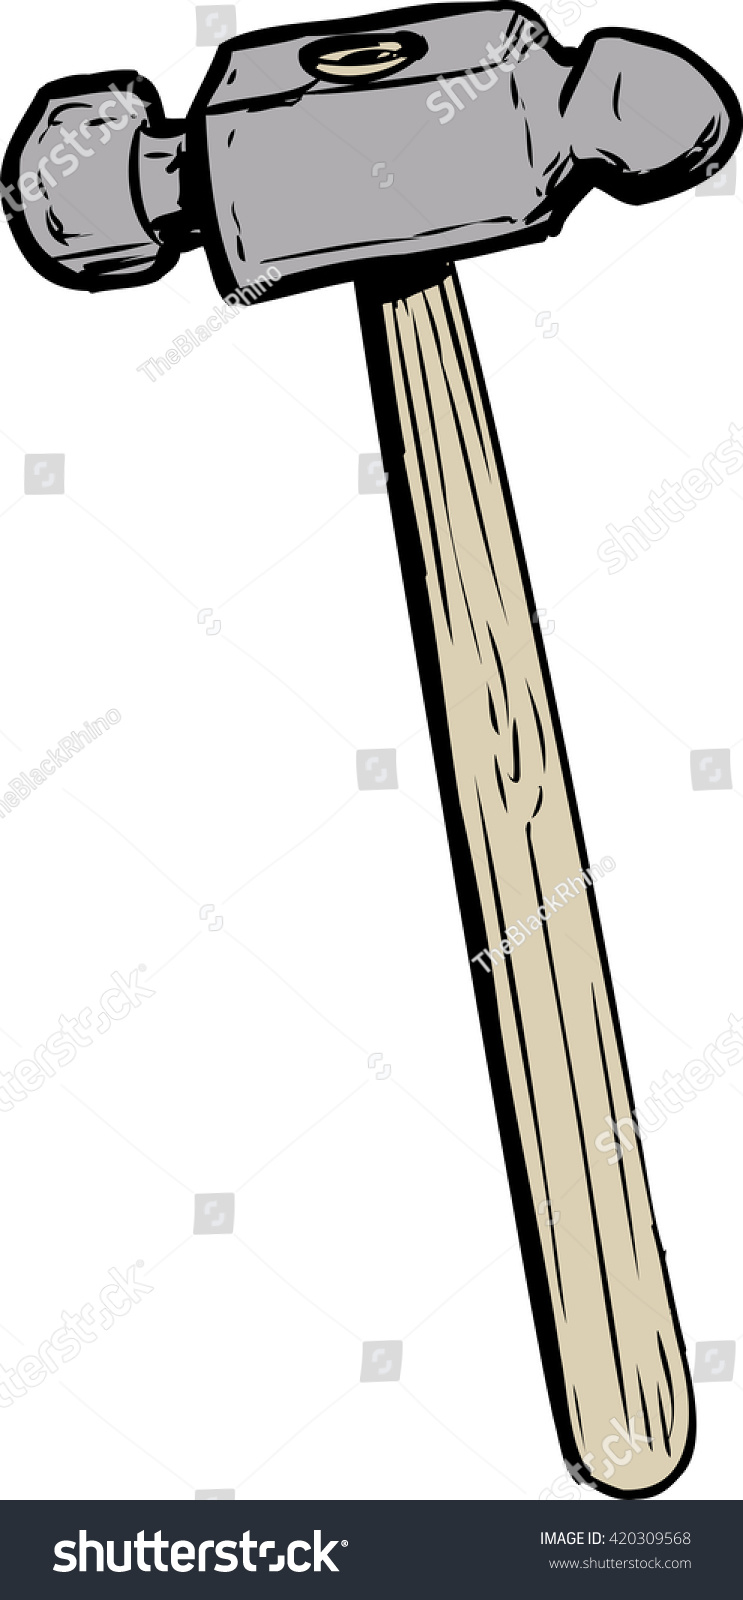 SVG of Single ball pein hammer illustration with wooden handle over isolated white background svg